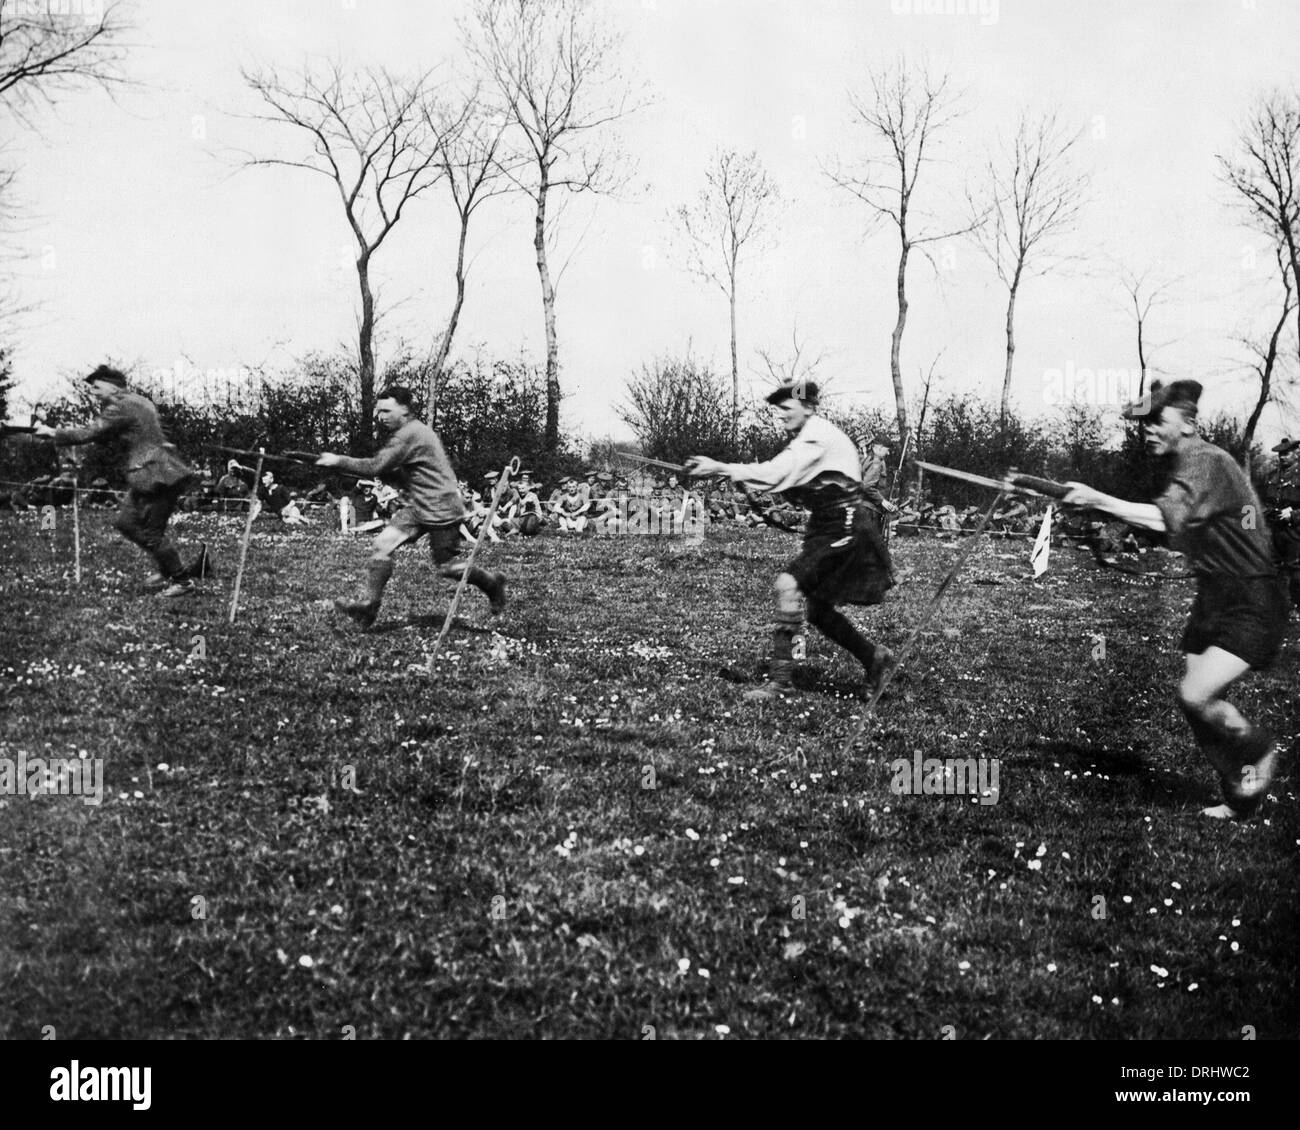 Scottish soldiers wwi kilt Black and White Stock Photos & Images - Alamy